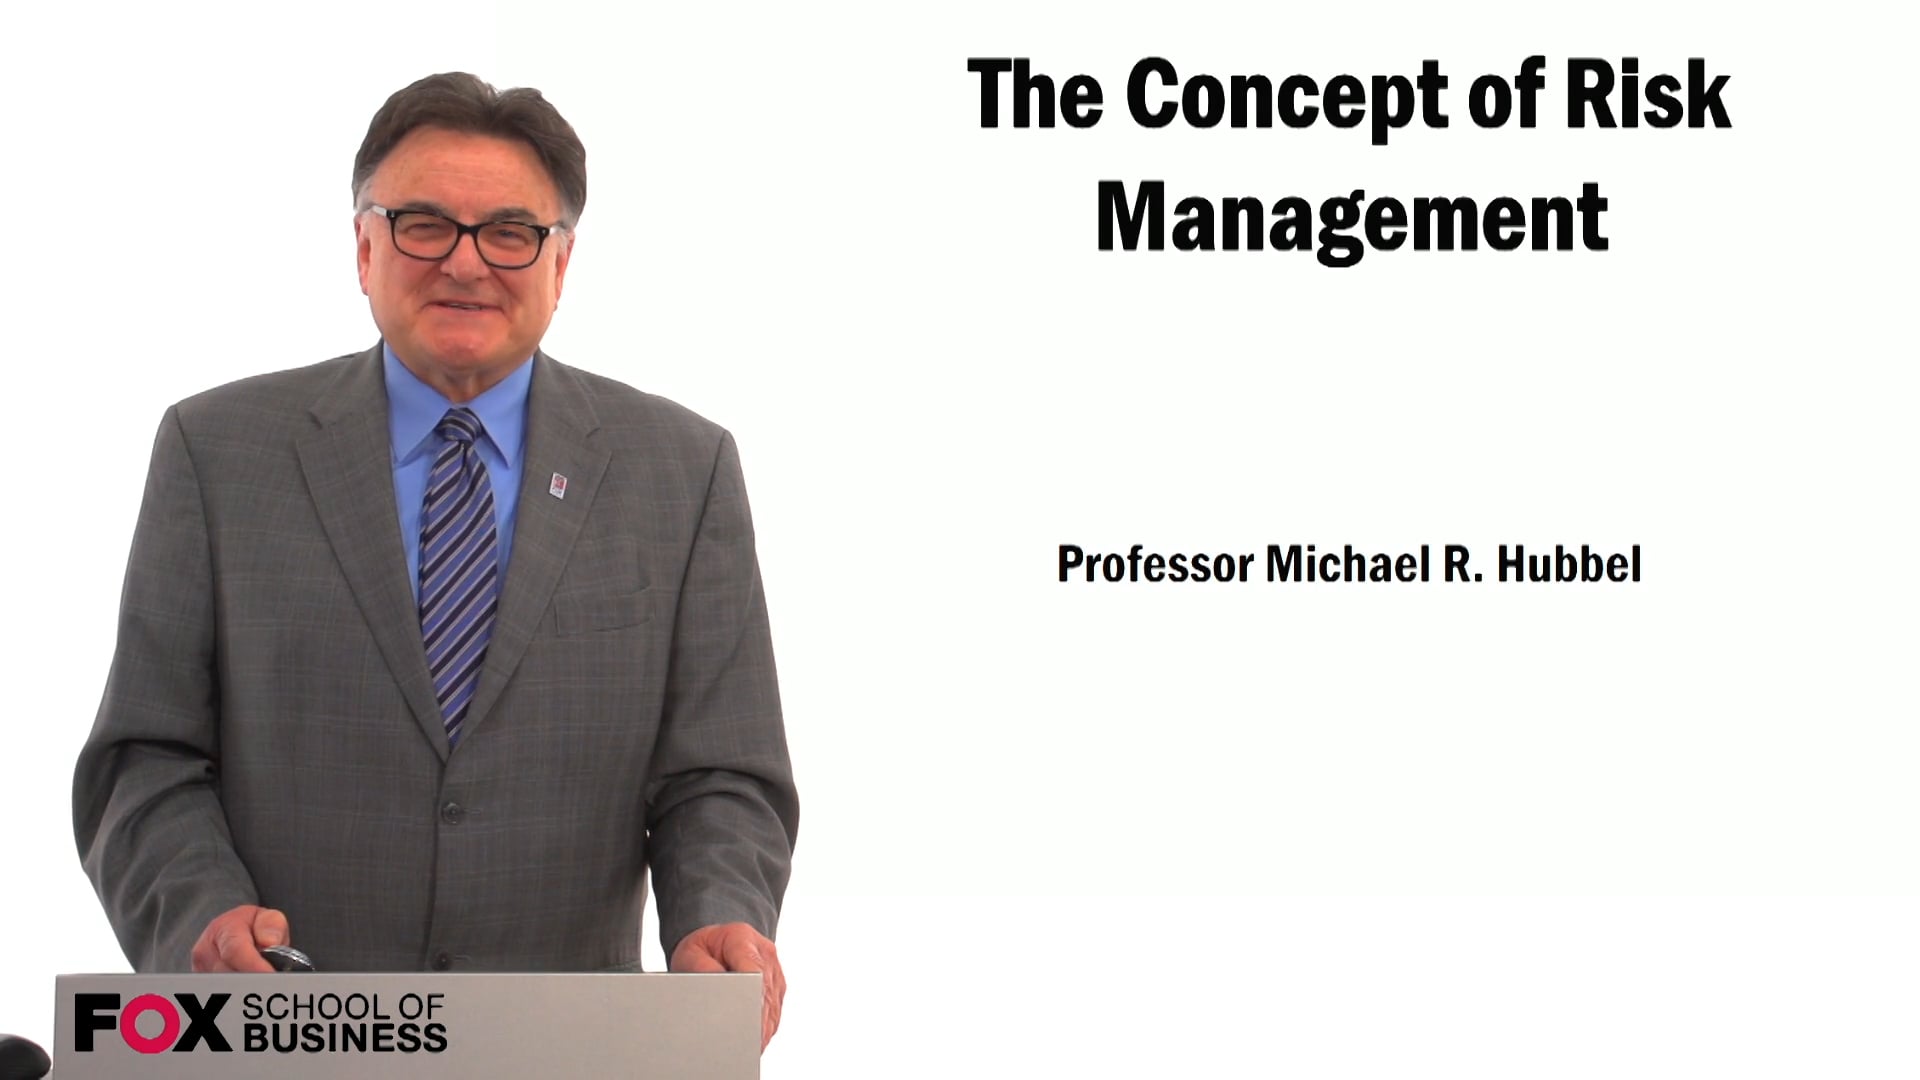 The Concept of Risk Management